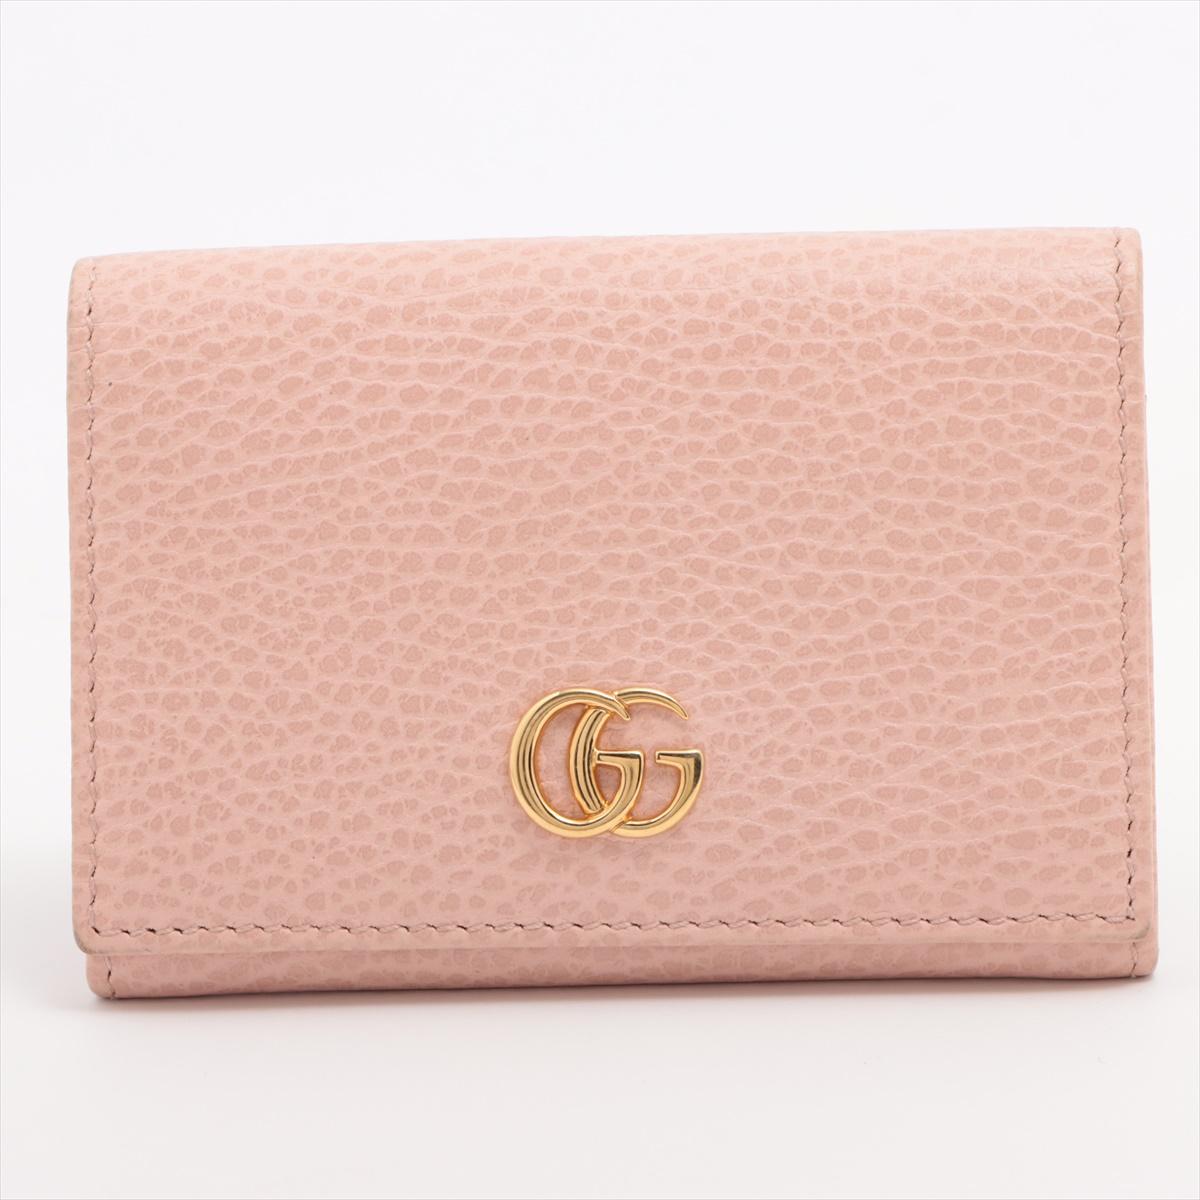 The Gucci GG Marmont Leather Card Case in Pink is a stylish and practical accessory that exudes luxury and sophistication. Crafted from high-quality leather, the card case features Gucci's iconic GG Marmont quilted pattern, showcasing the brand's